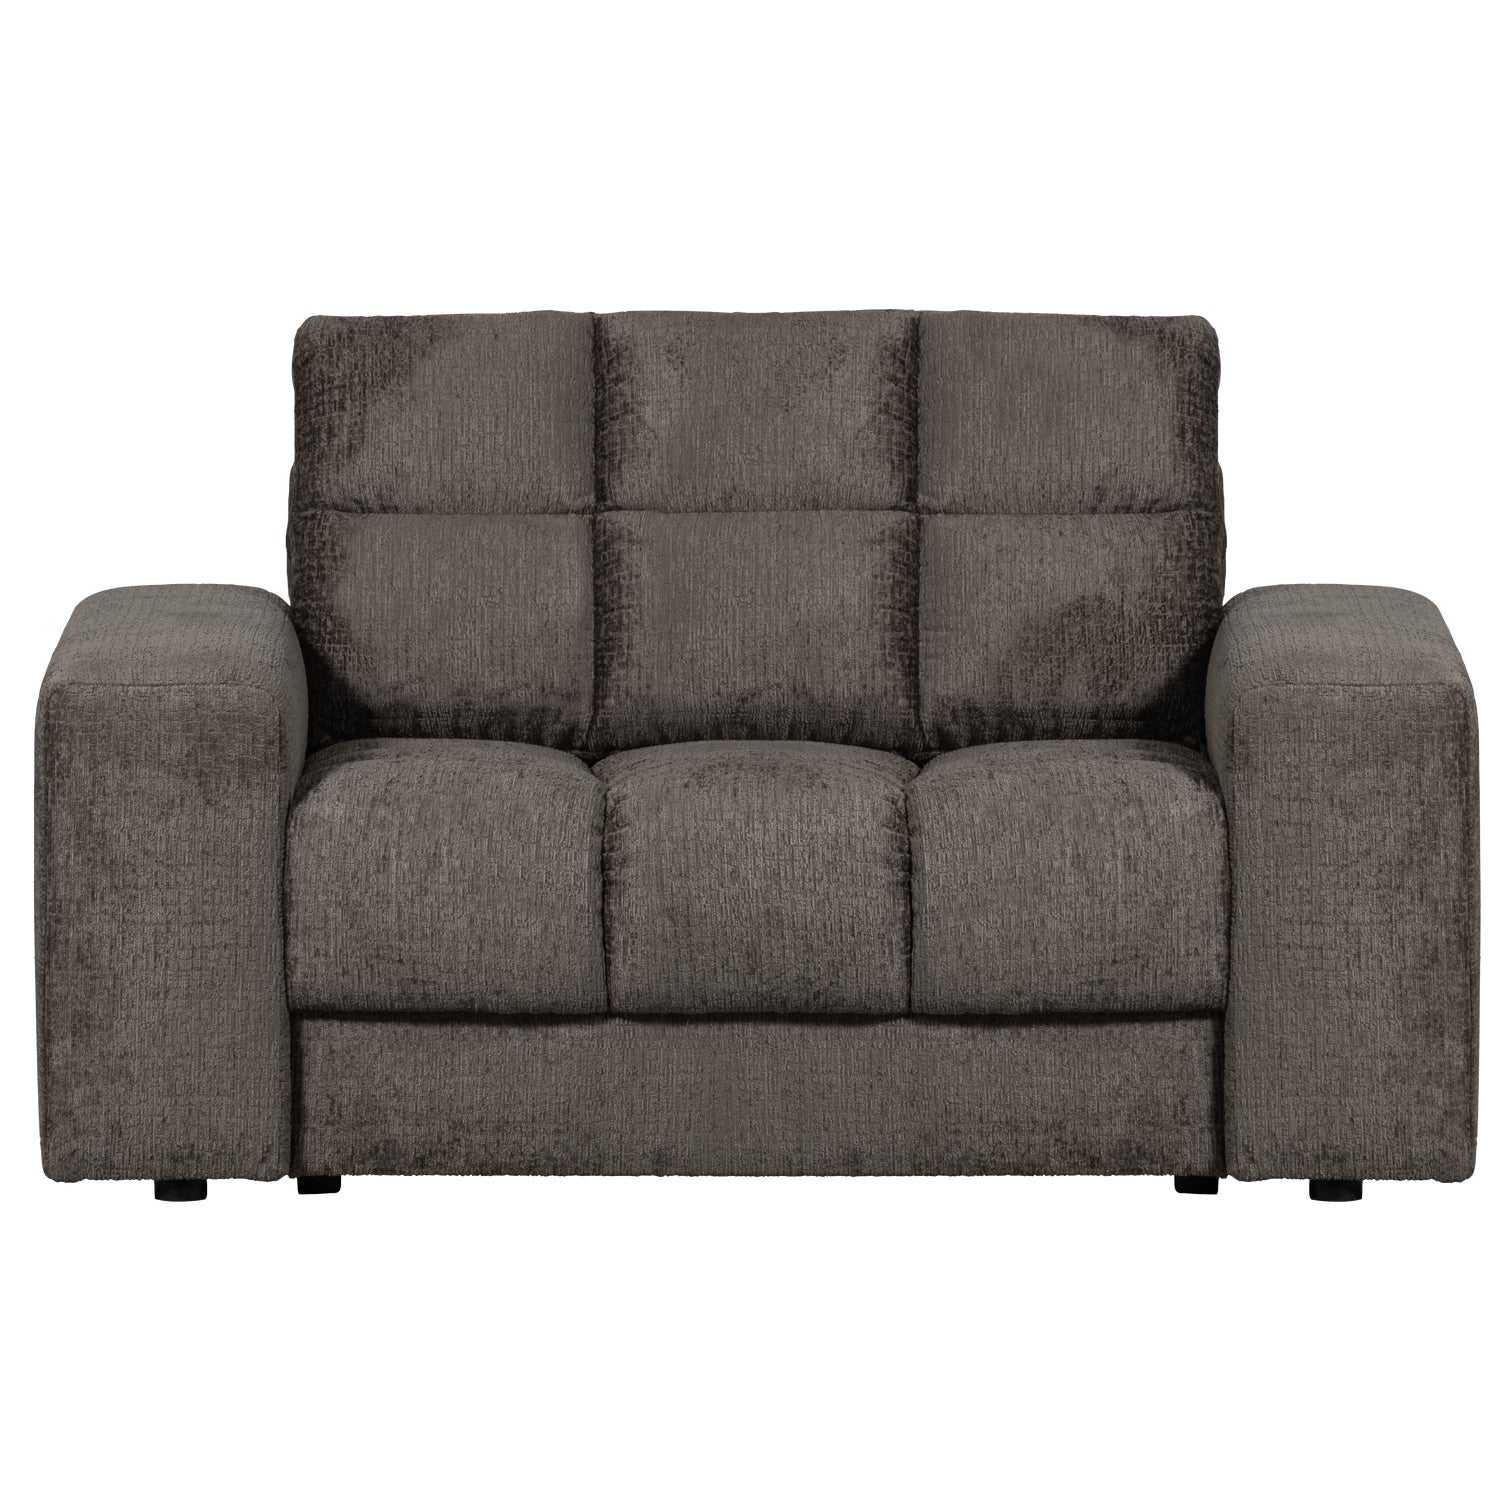 379006-MO-01_VS_WE_second_date_loveseat_structure_velvet_mountain.png?auto=webp&format=png&width=1500&height=1500